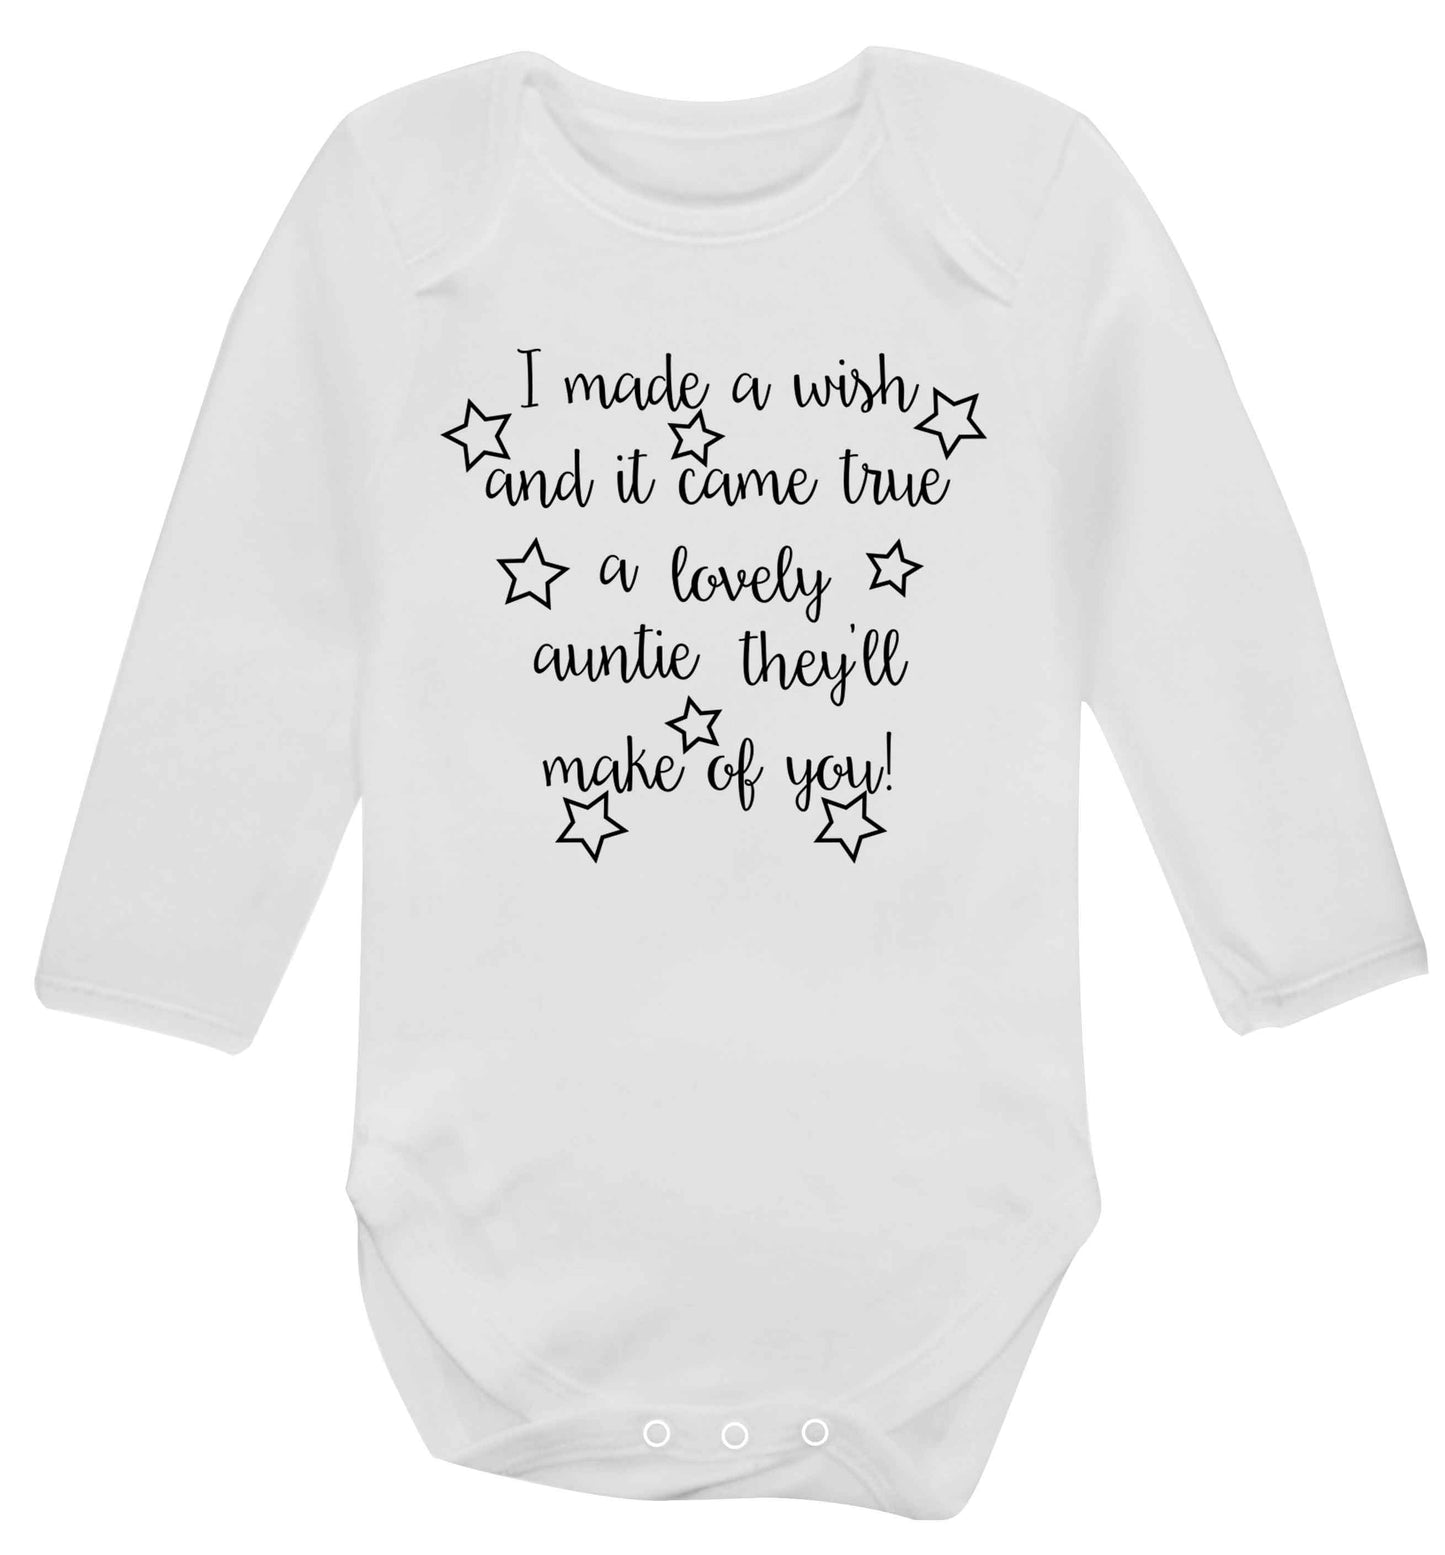 I made a wish and it came true a lovely auntie they'll make of you! Baby Vest long sleeved white 6-12 months